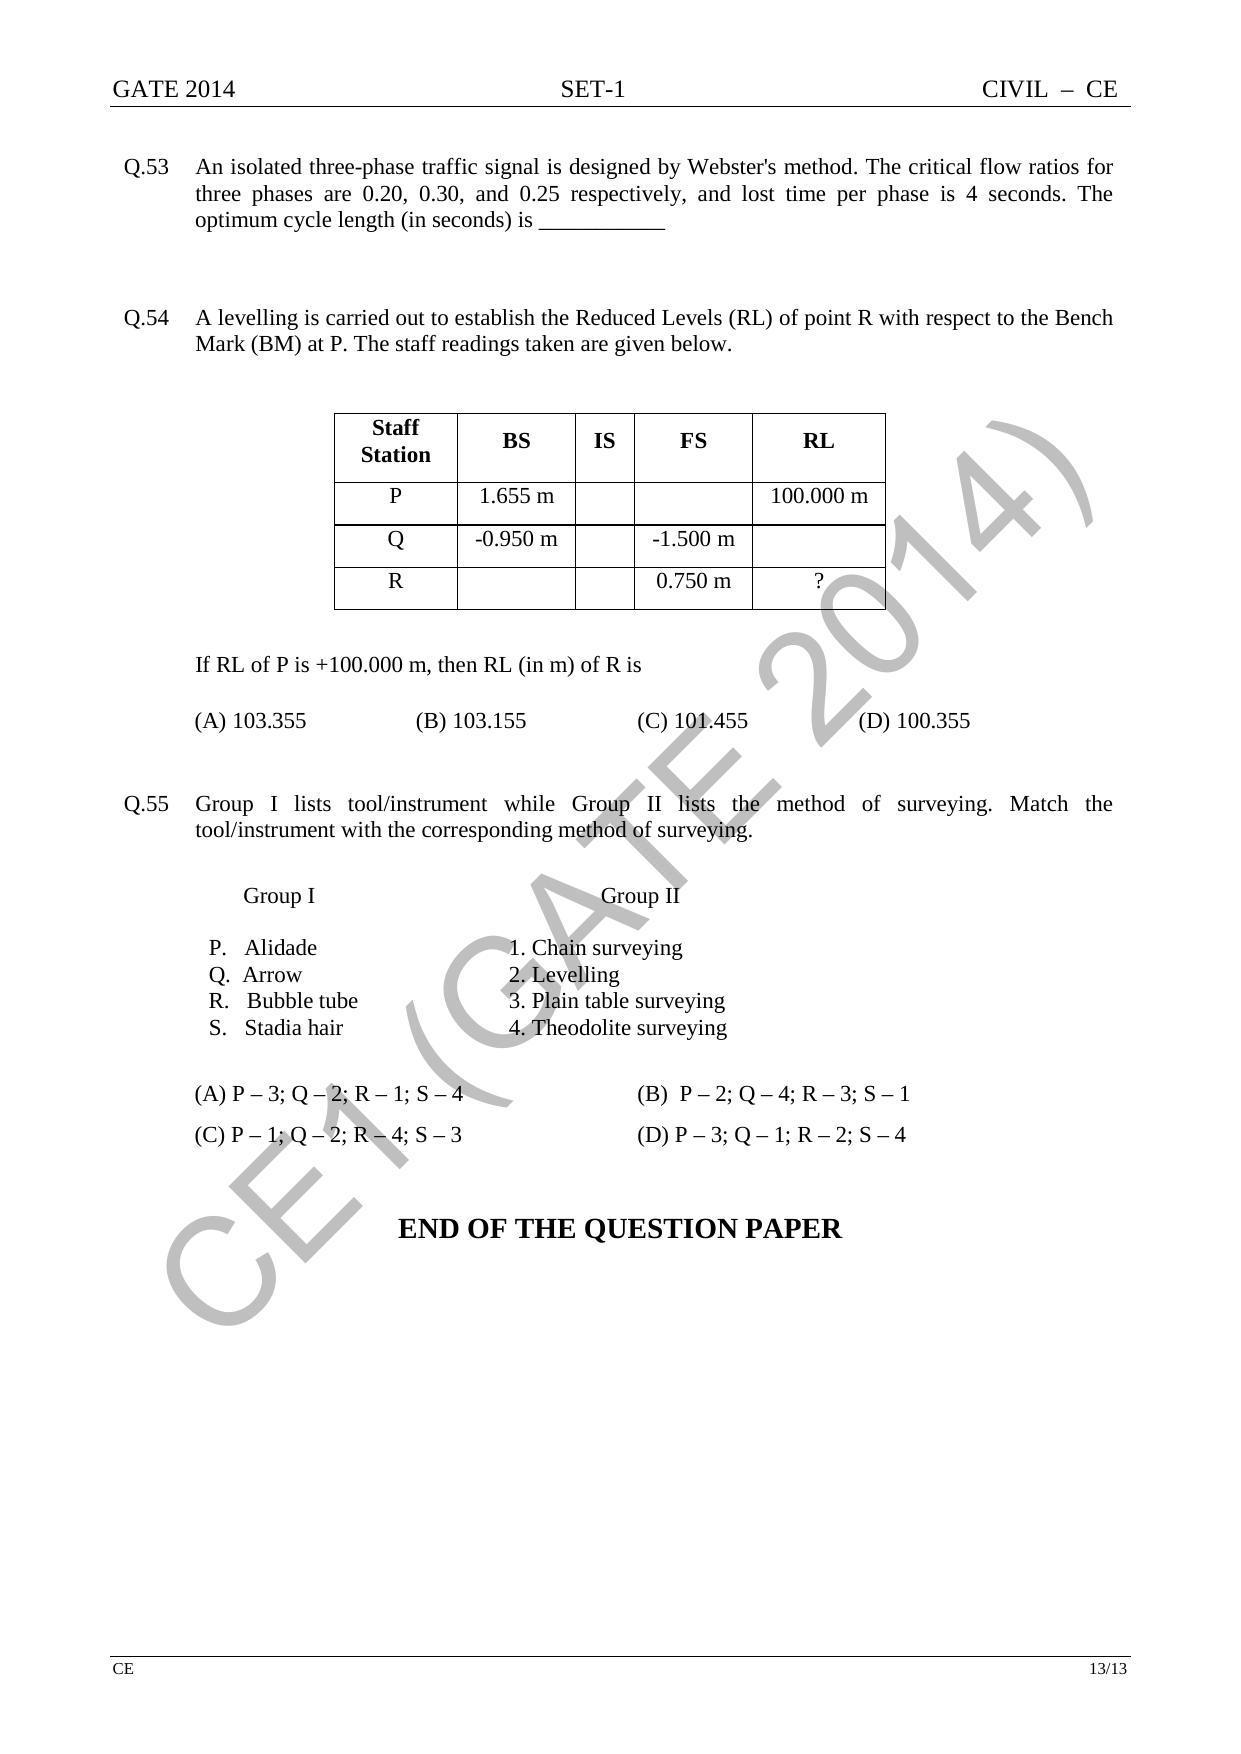 GATE 2014 Civil Engineering (CE) Question Paper with Answer Key - Page 20